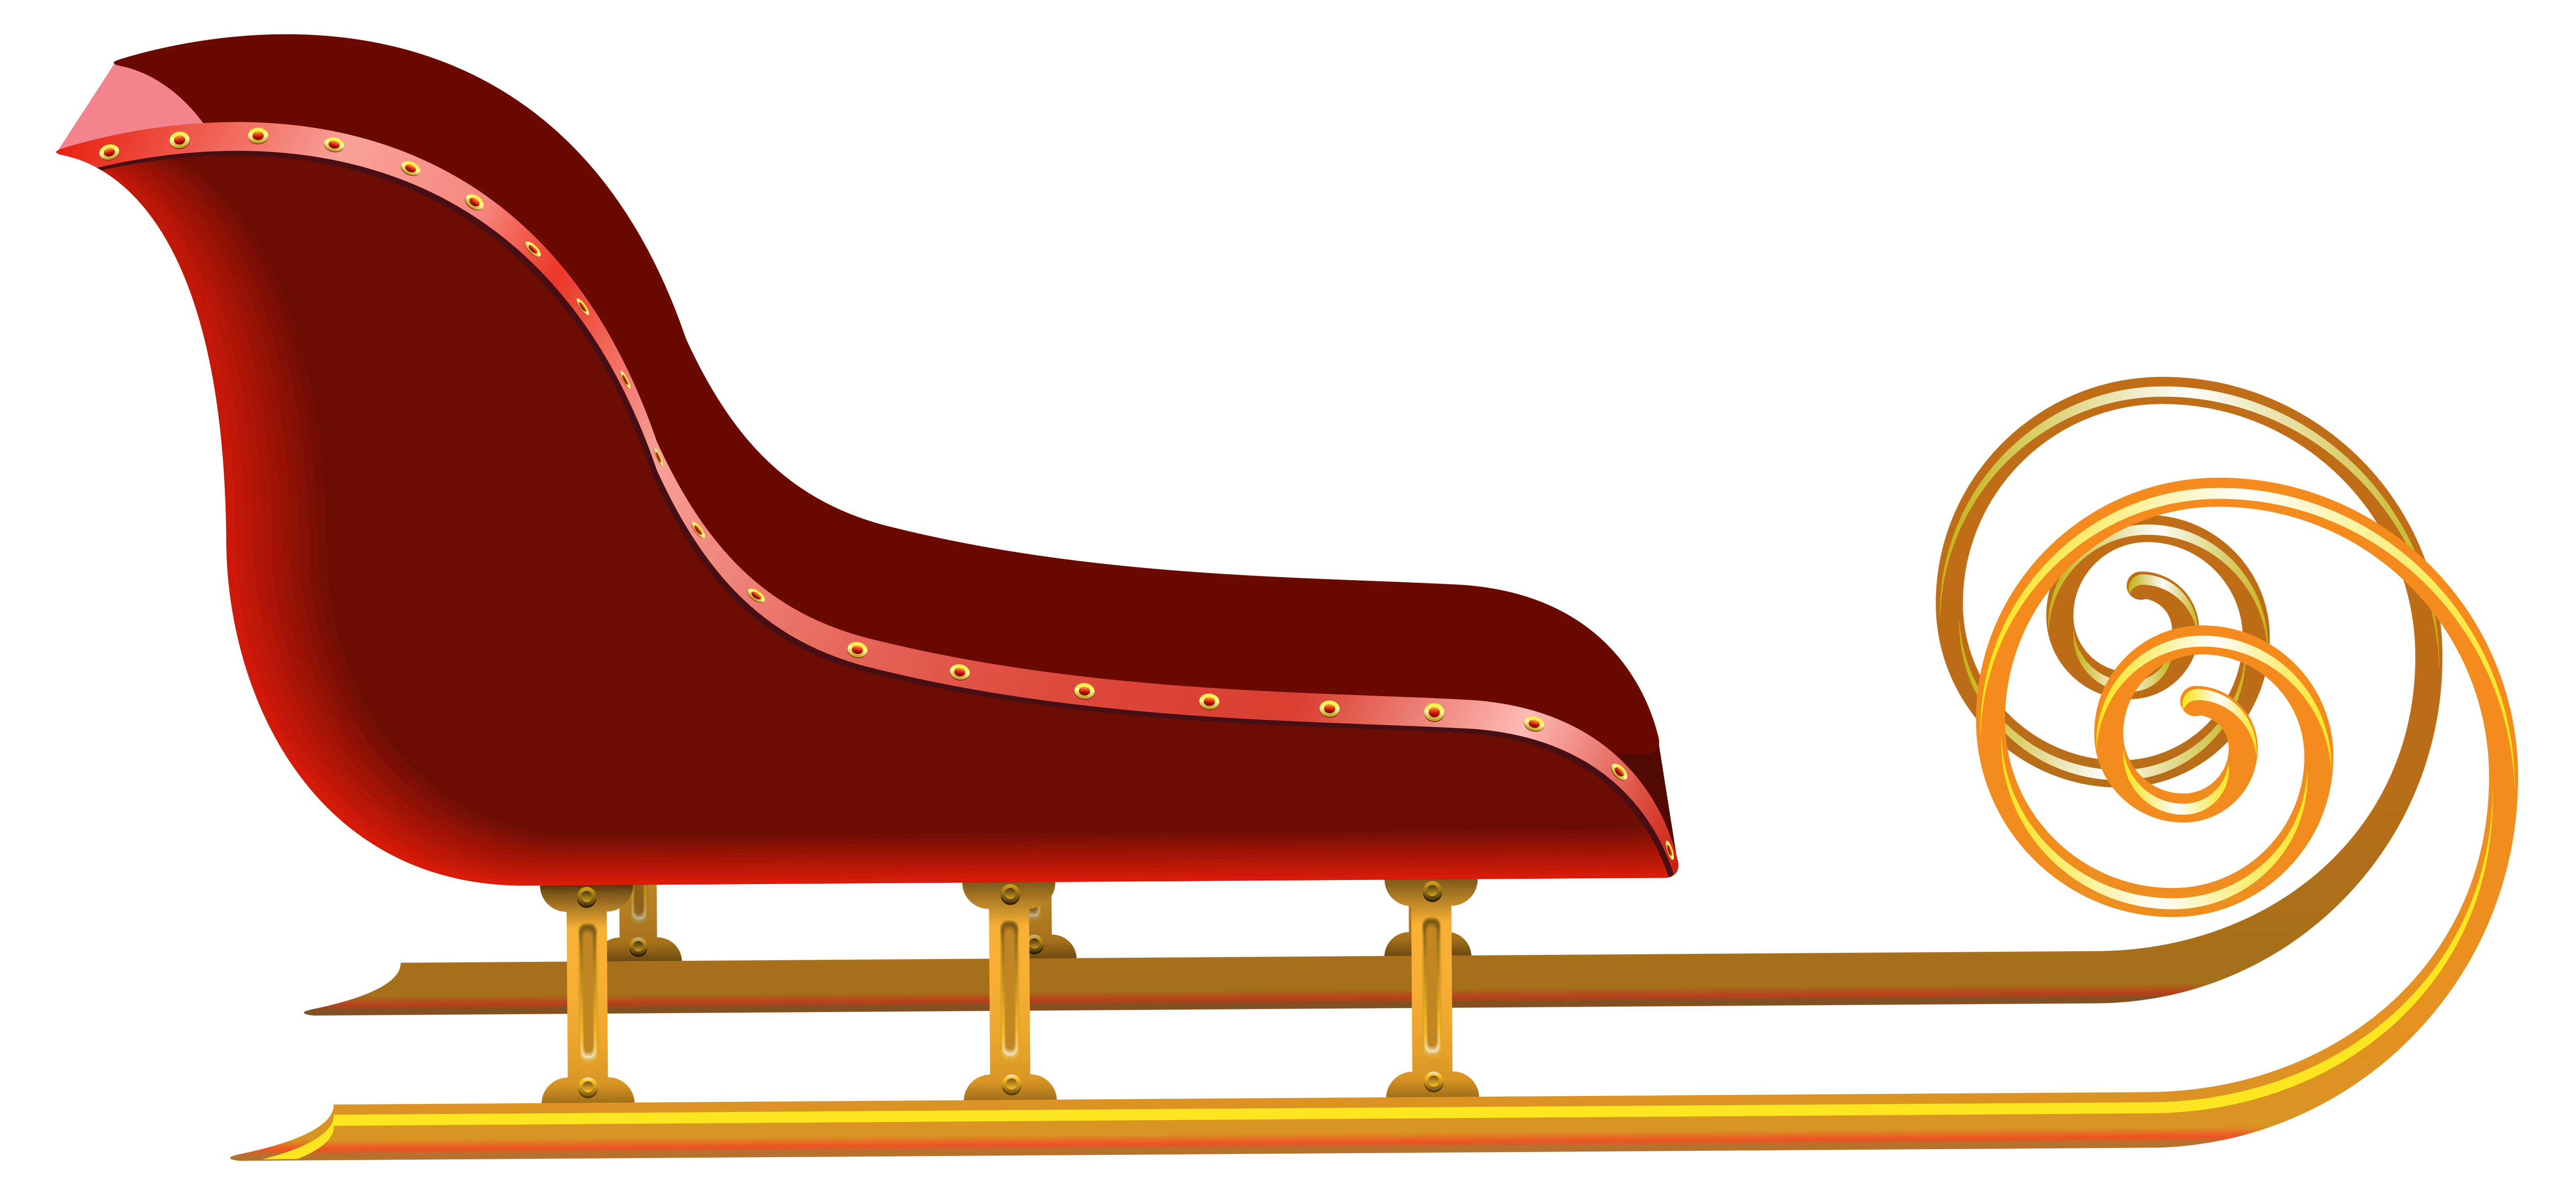 santa sleigh, clipart sleigh png and cliparts for download hddfhm 30496